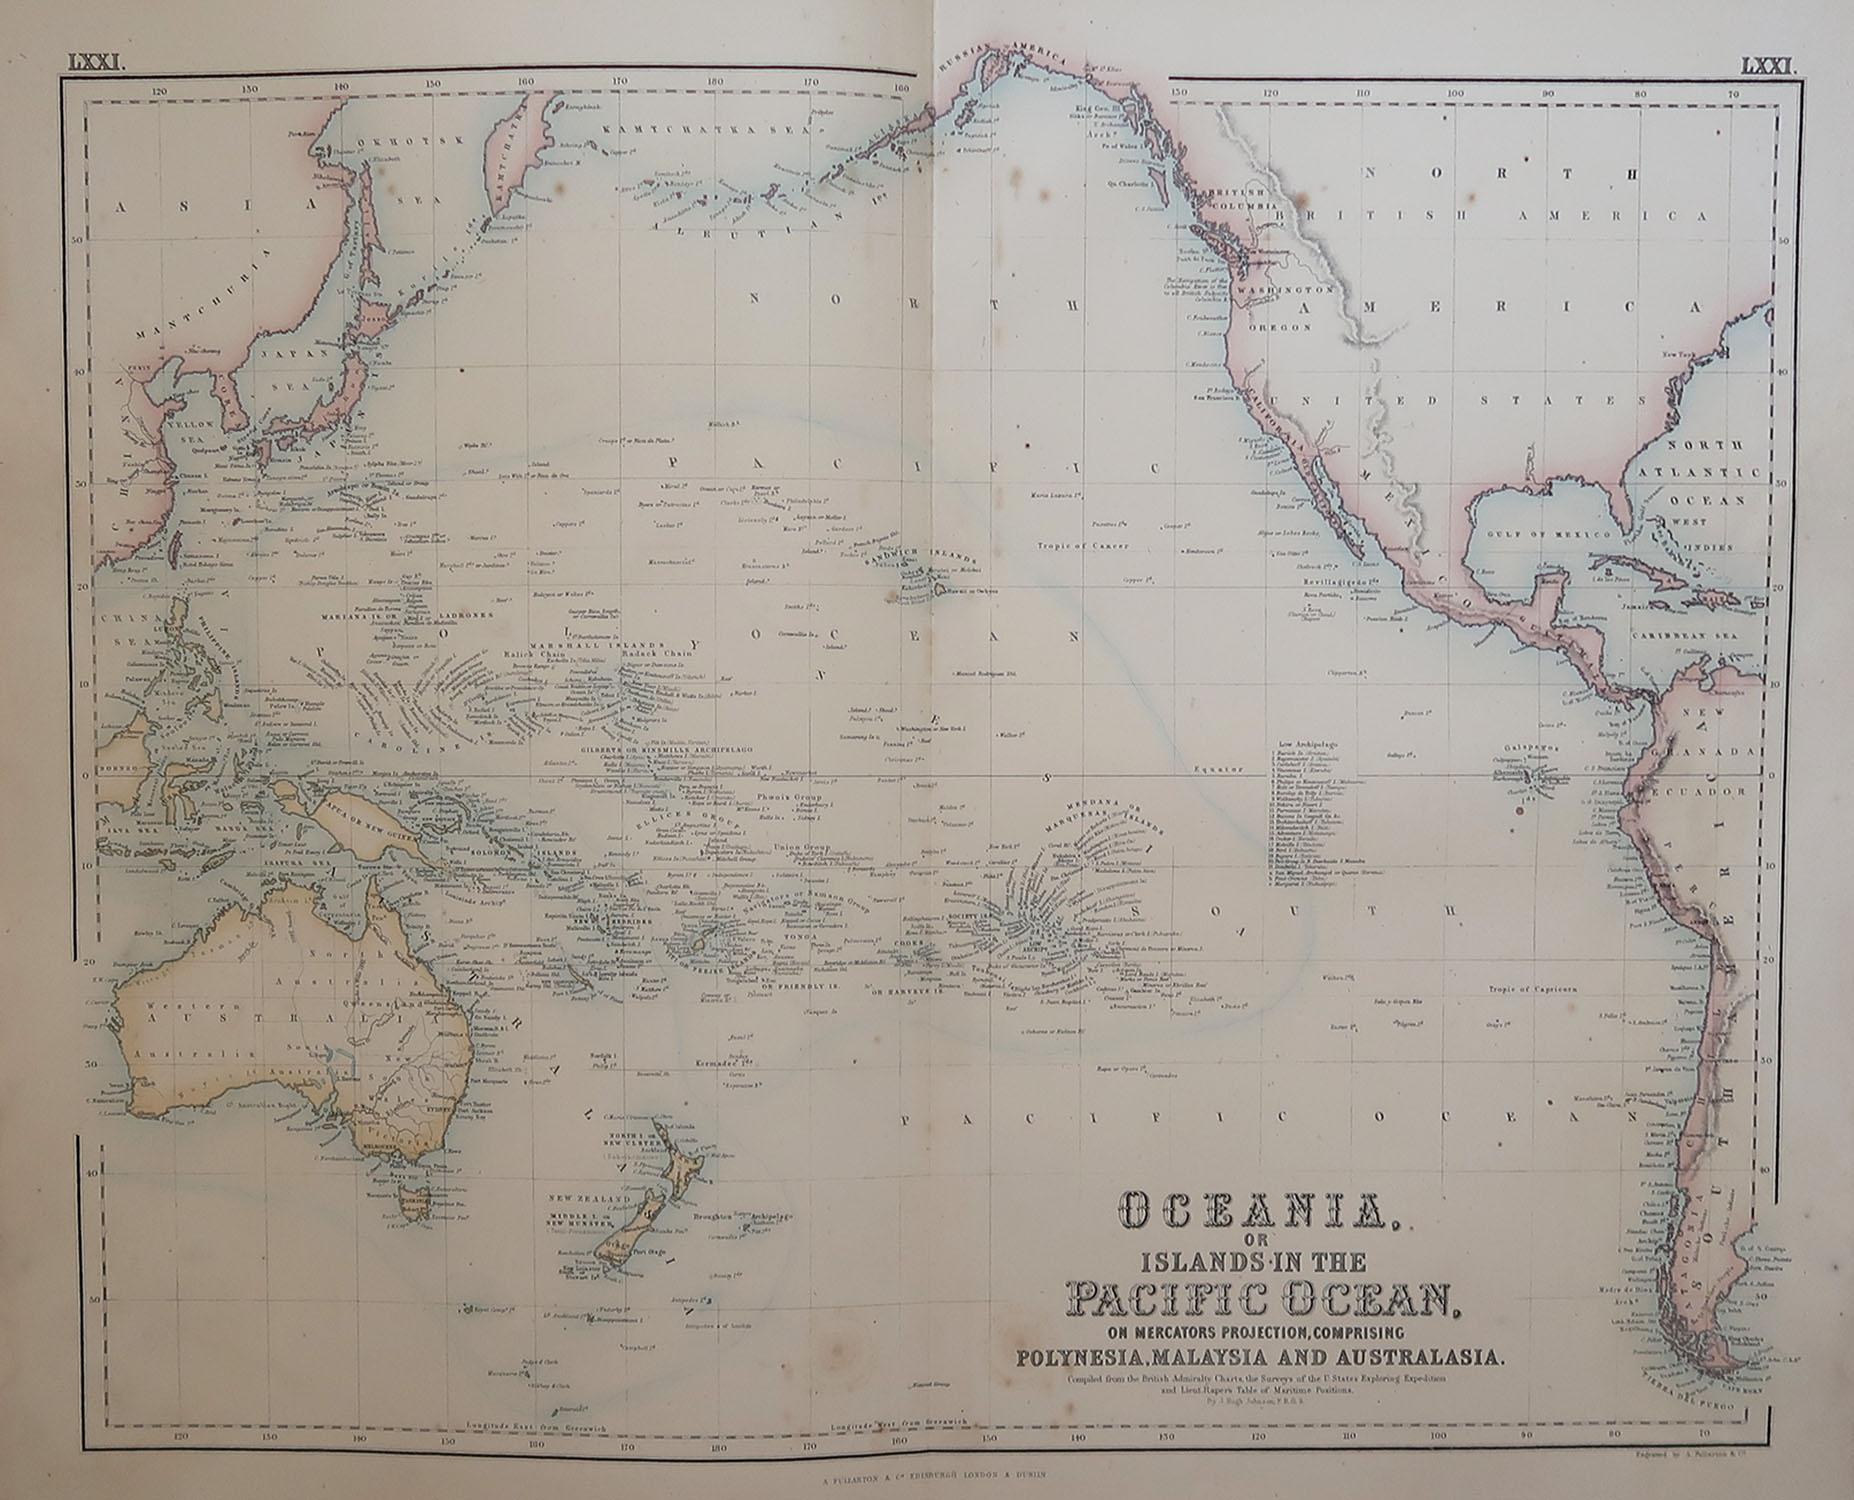 Great map of The Pacific Ocean

From the celebrated Royal Illustrated Atlas

Lithograph by Swanston. Original color. 

Published by Fullarton, Edinburgh. C.1870

Repairs to minor edge tears 

Unframed.












 